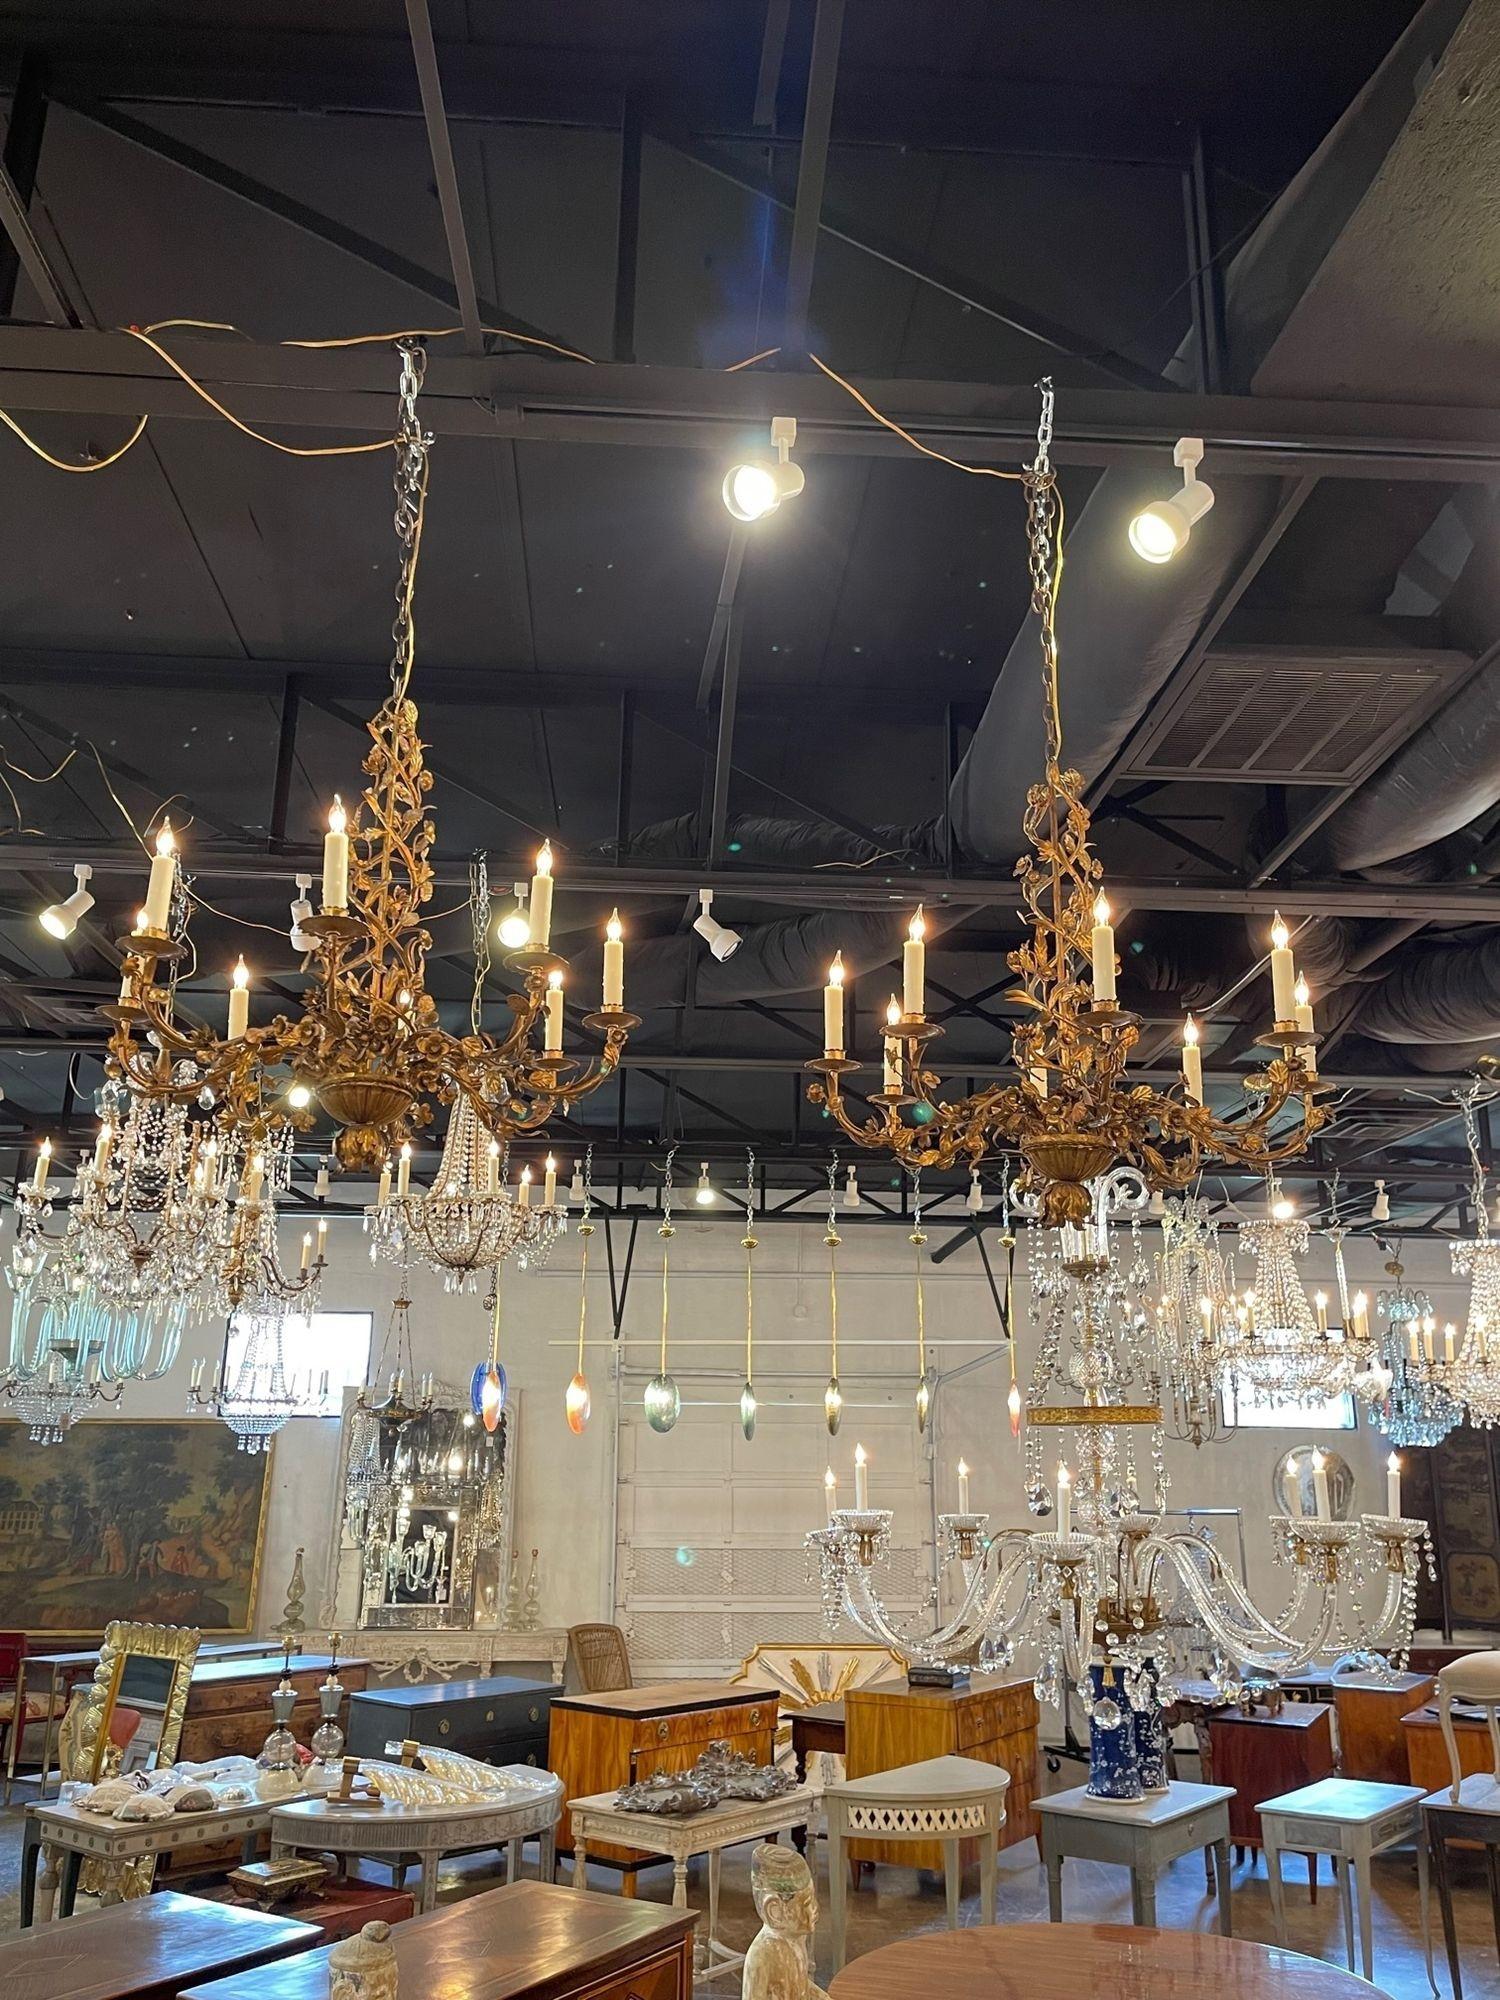 Exquisite 19th century Italian gilt tole floral chandeliers with 8 lights. These are very unique, covered in gold flowers and leaves. So pretty! Price listed is for 1.